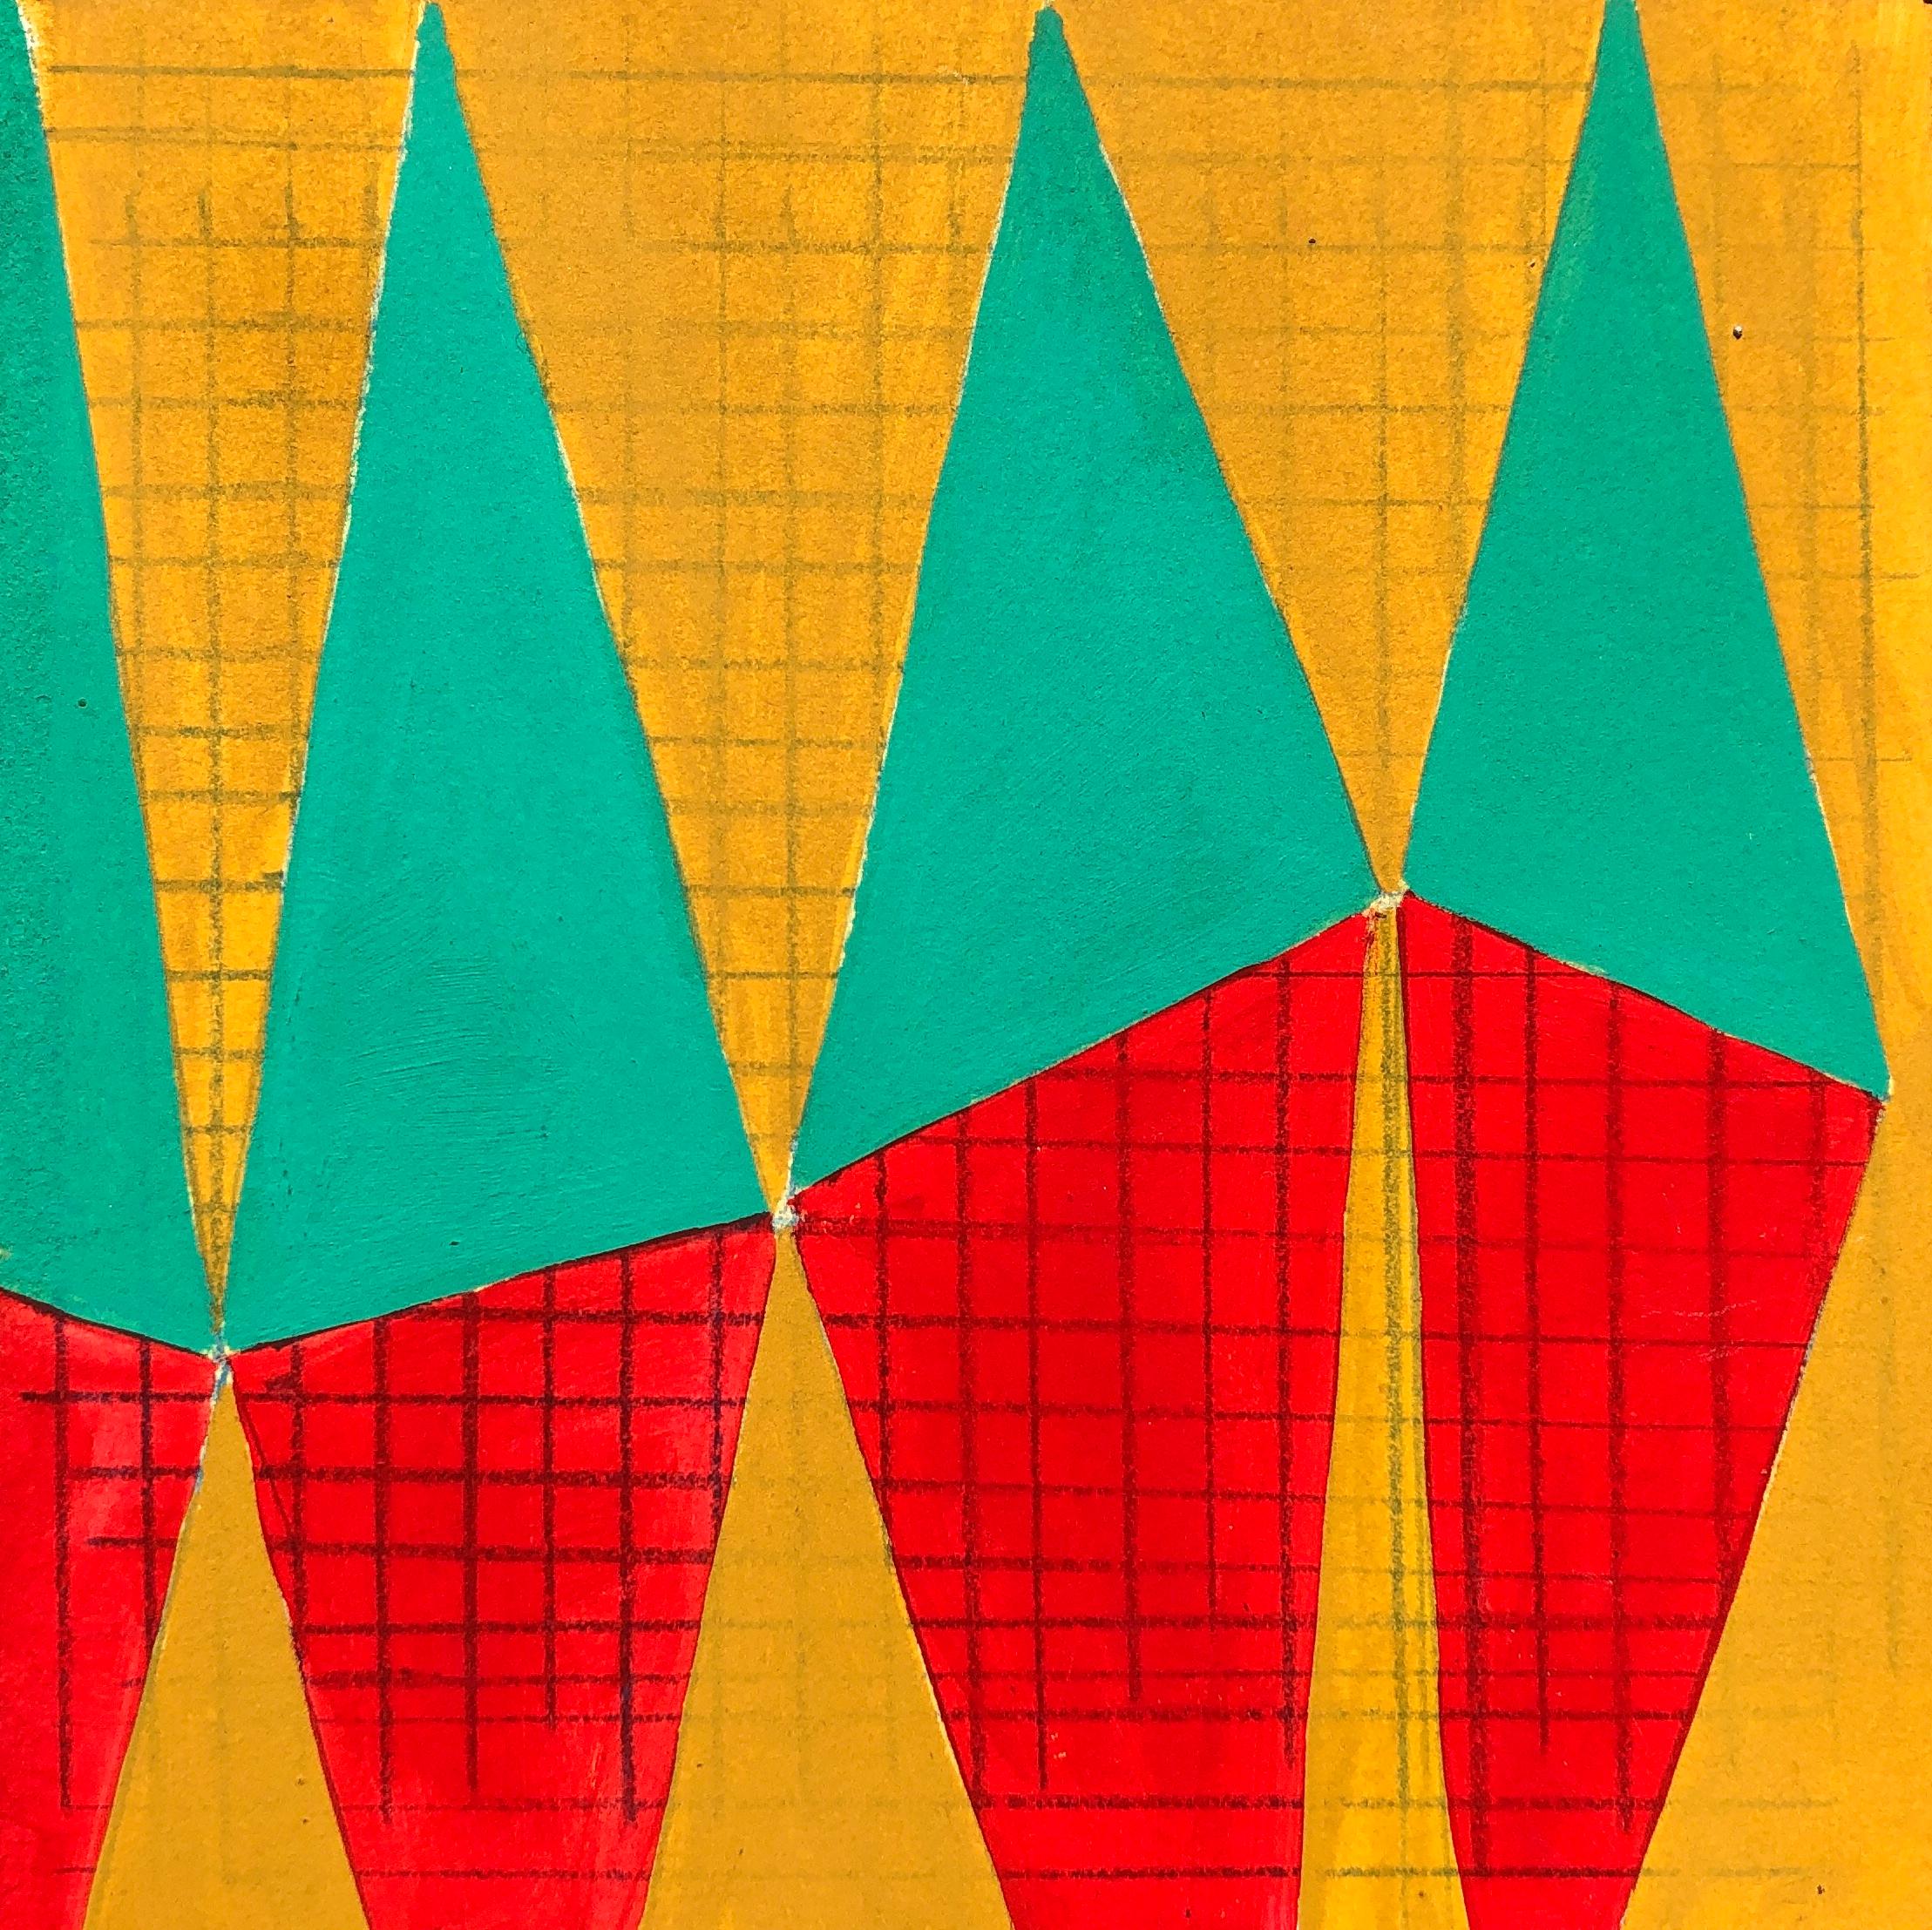 S2, abstract geometric pattern, mixed media on paper, green, yellow and red